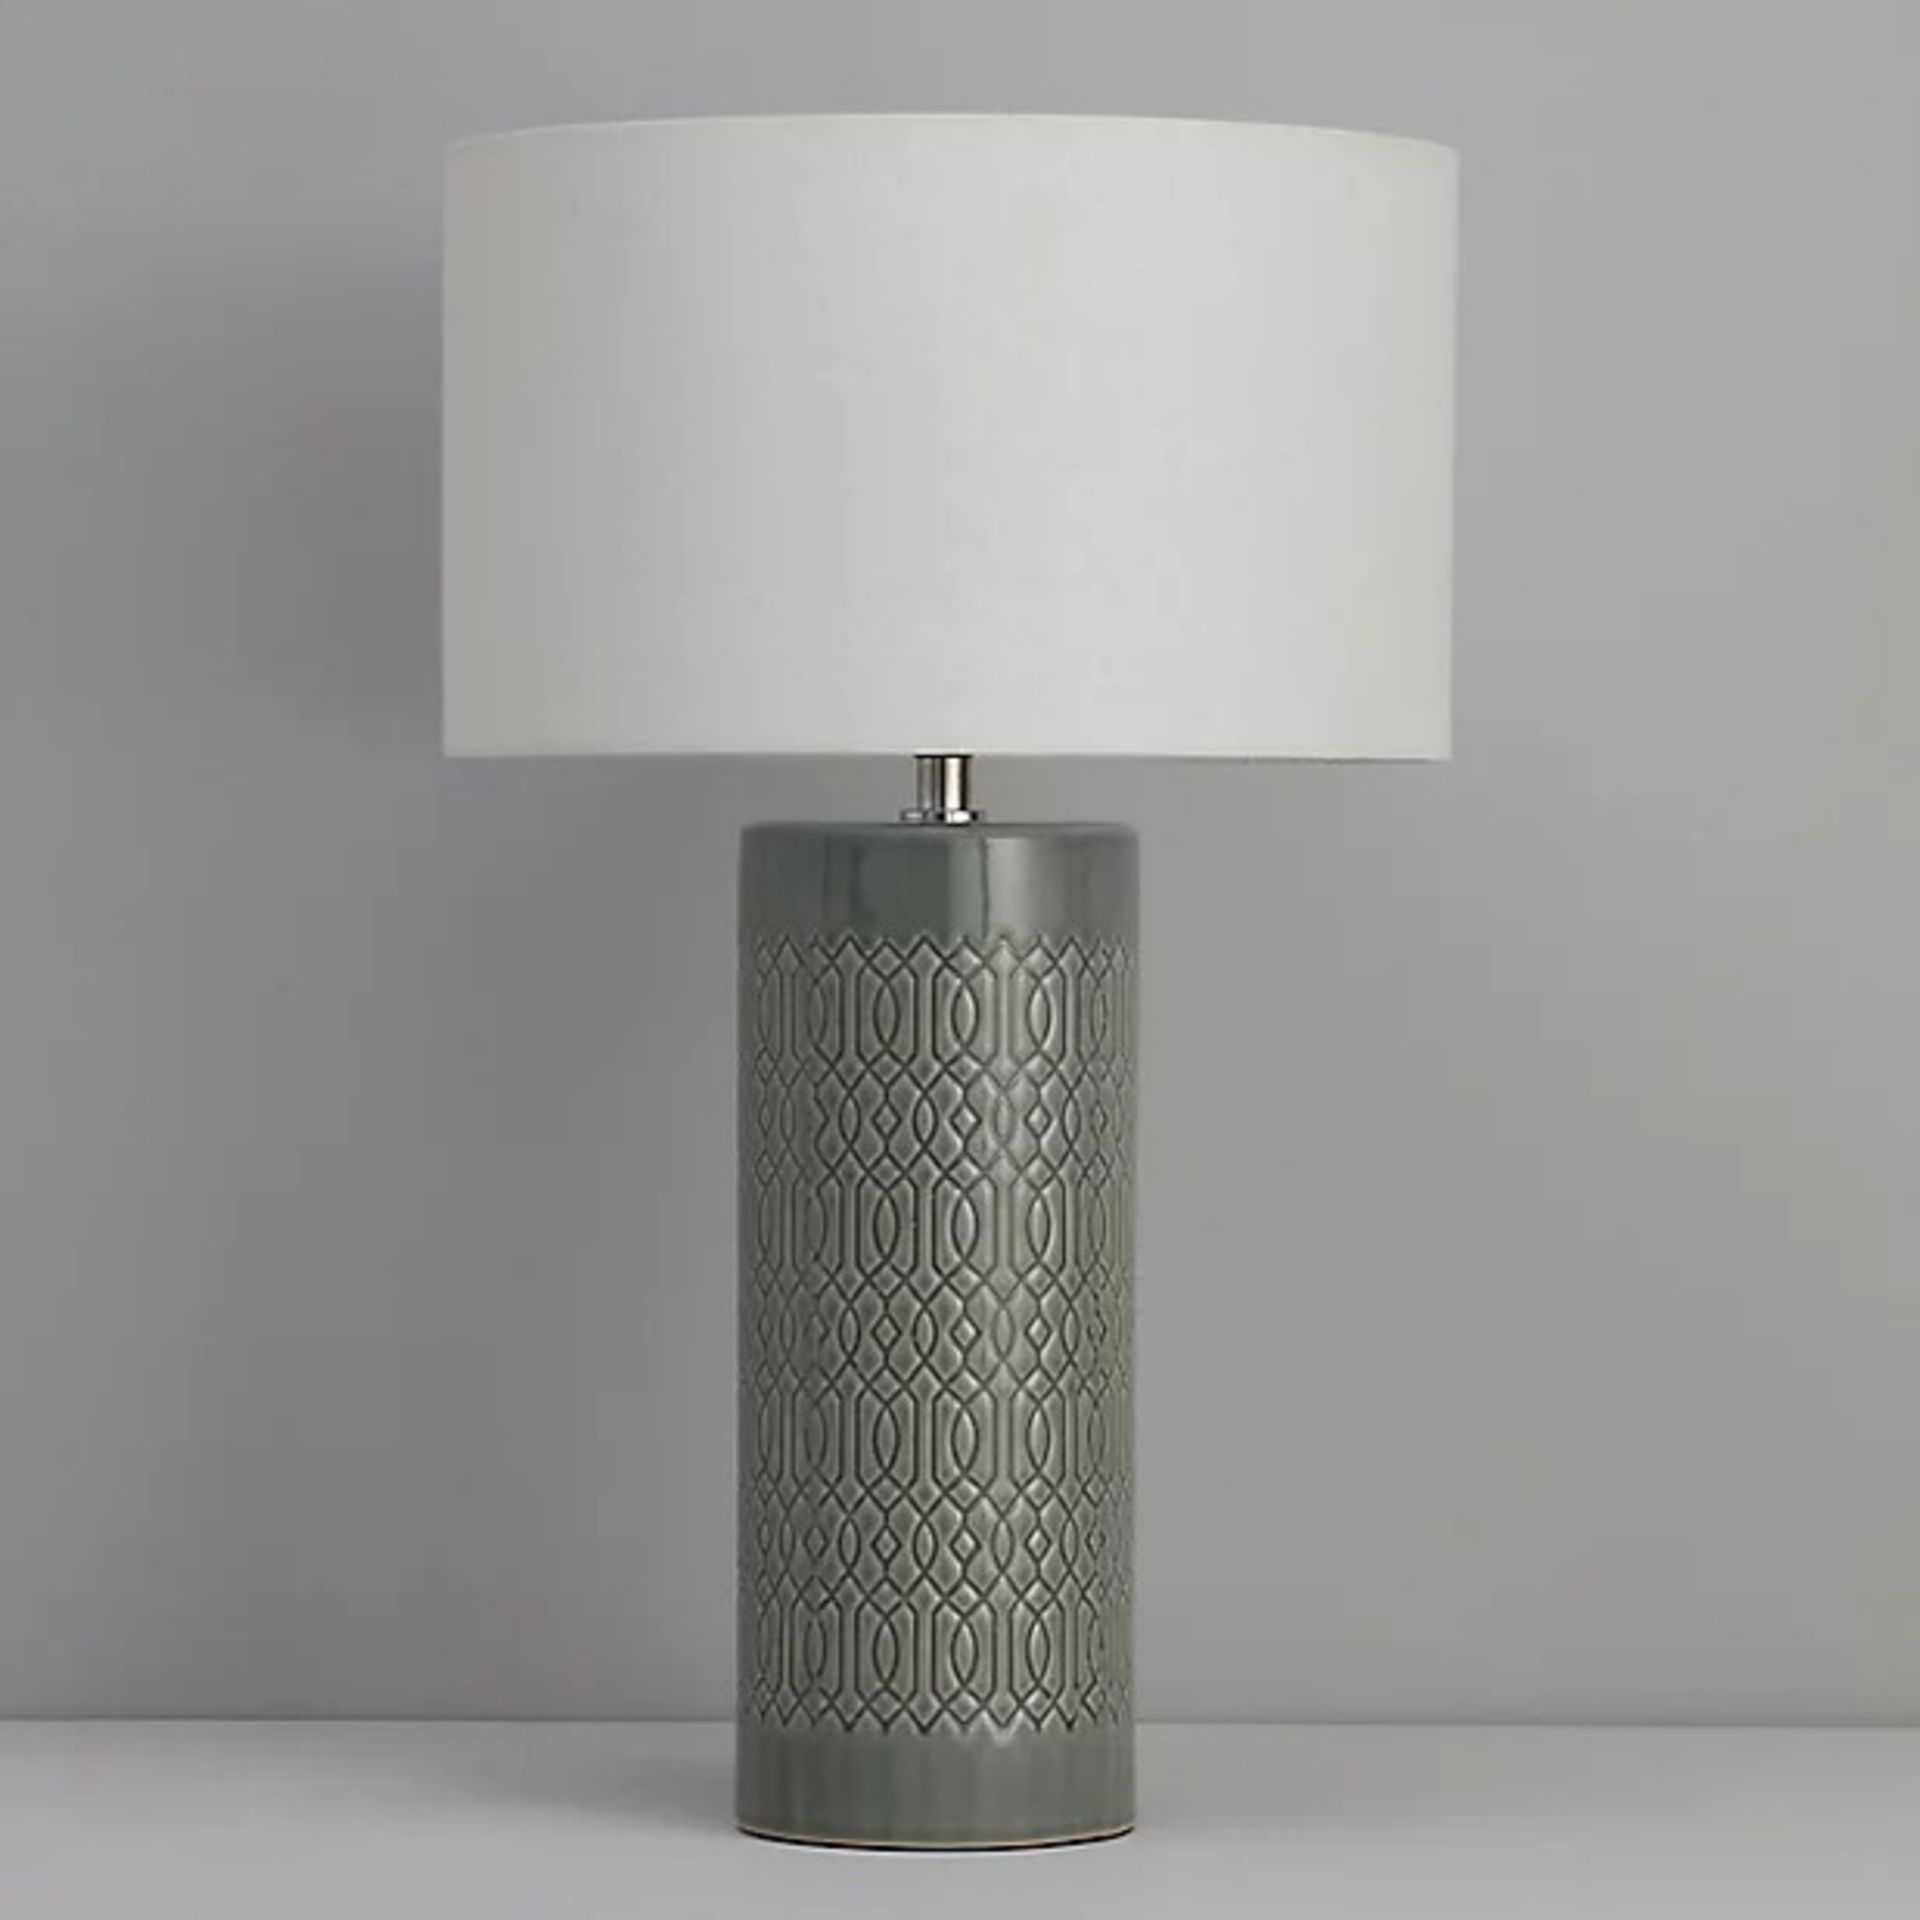 Inlight Dactyl Embossed Grey Cylinder Table light - ER47